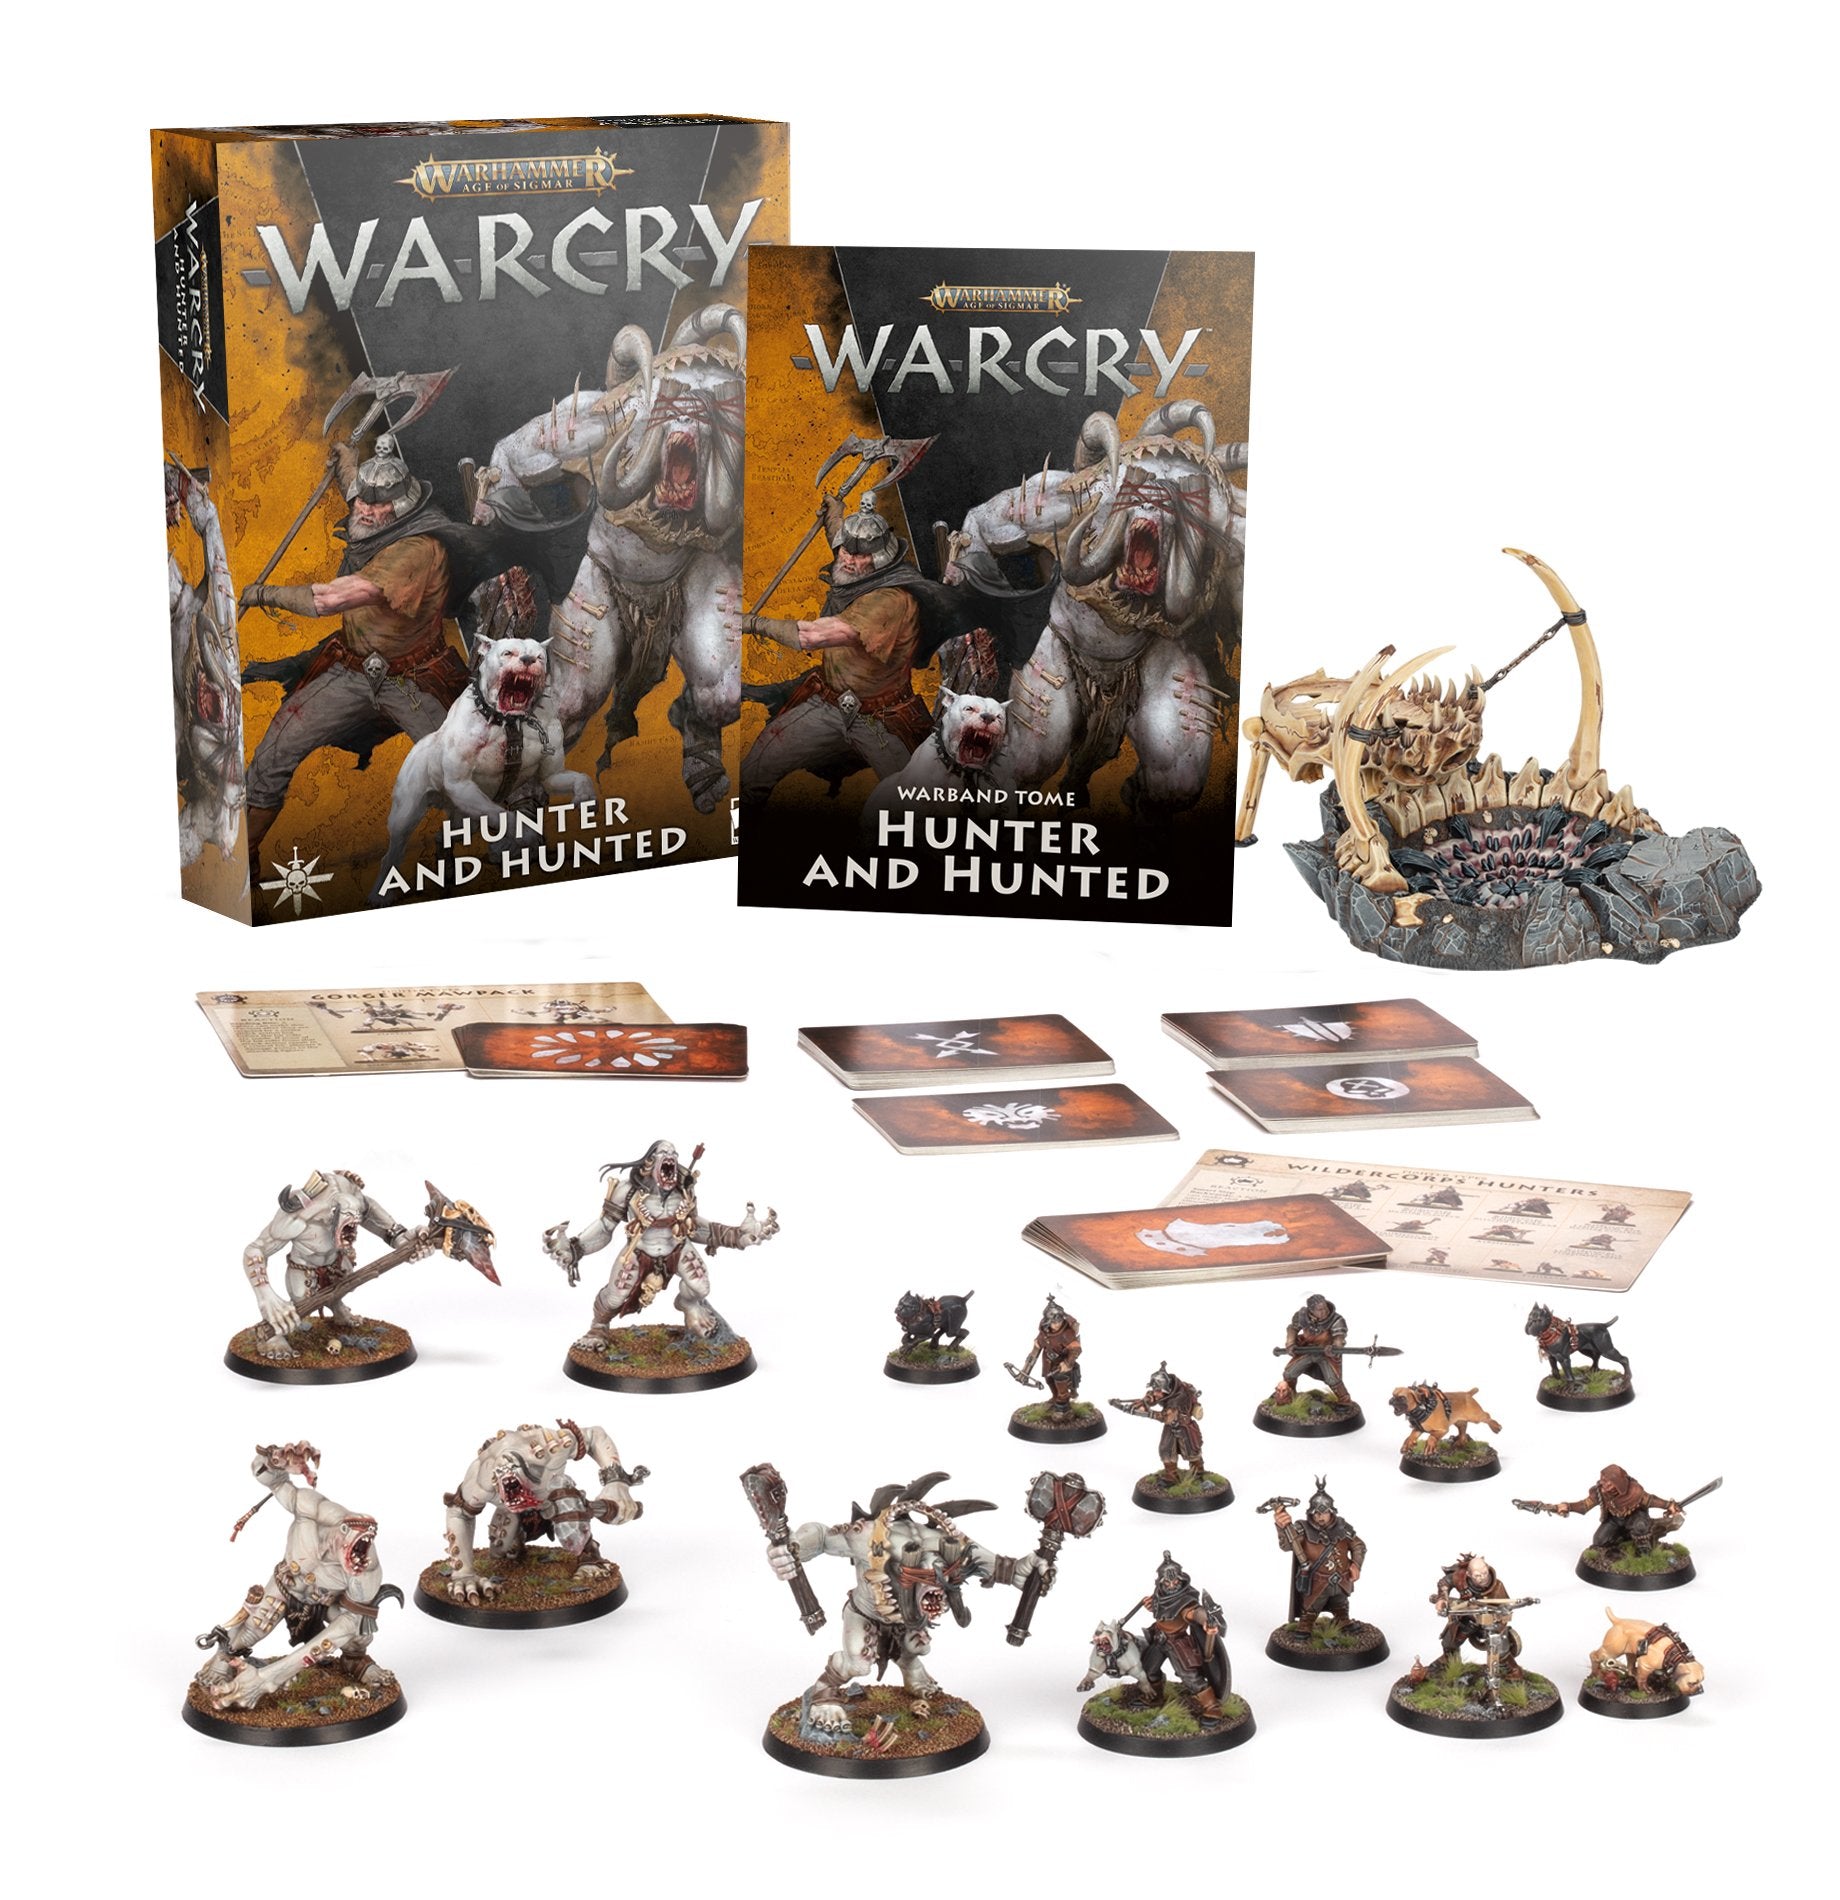 Warcry: Hunter & Hunted | Impulse Games and Hobbies